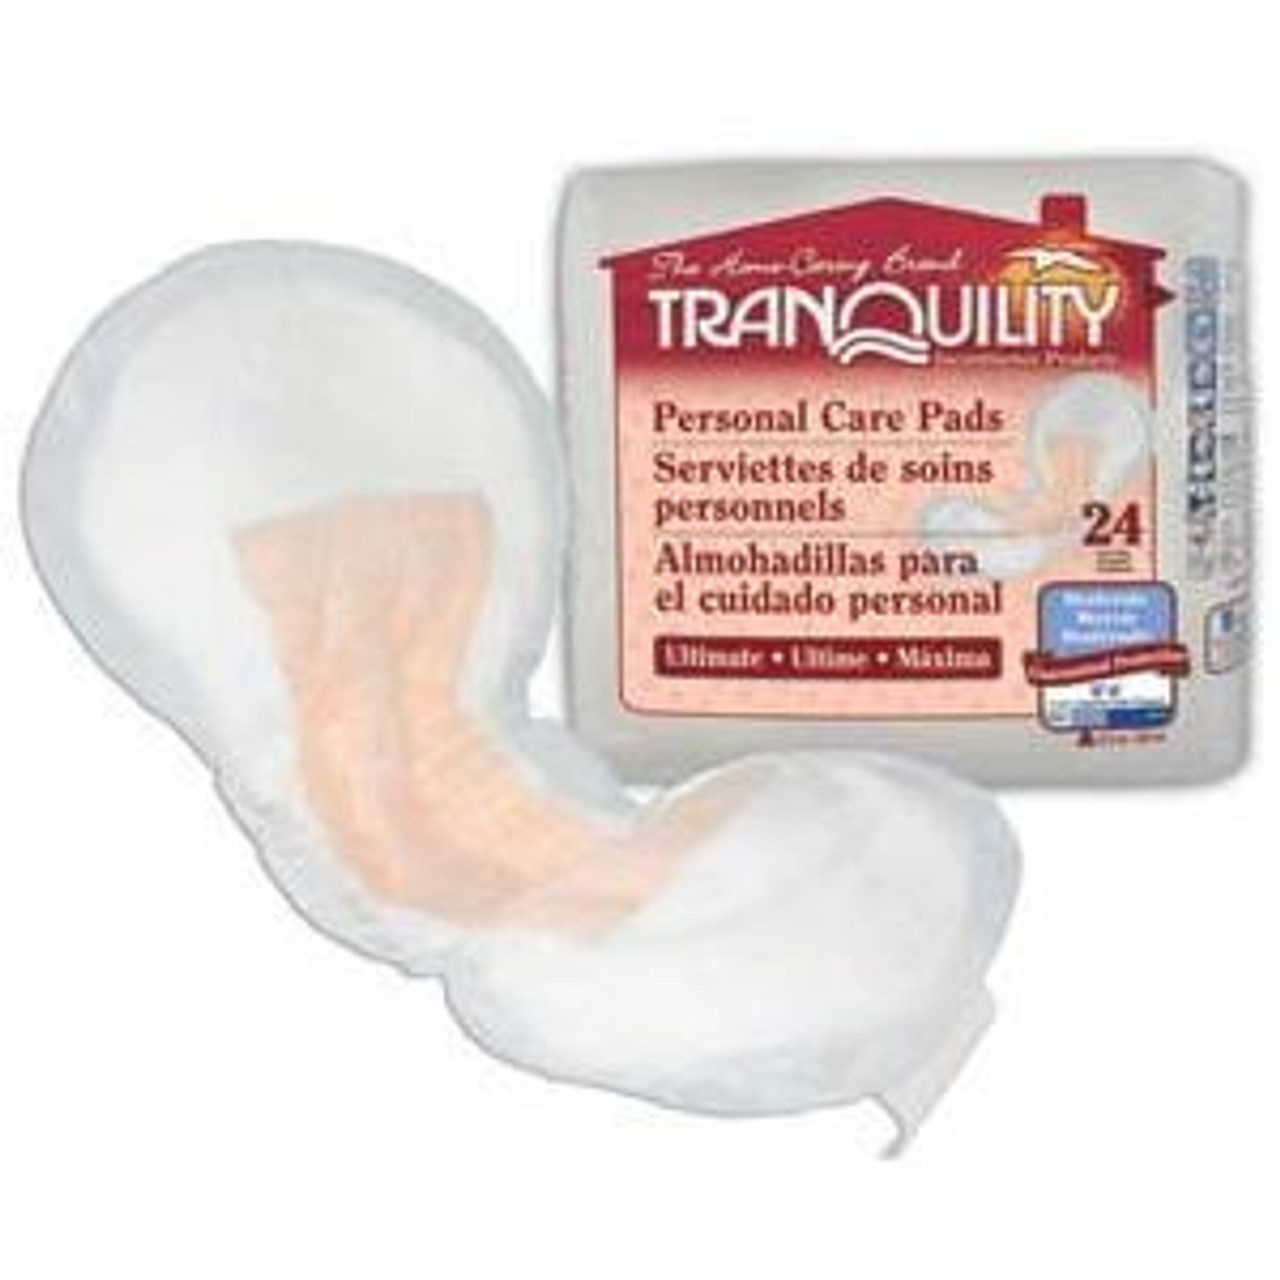 Tranquility Personal Care Pads - Smart Aging LLC